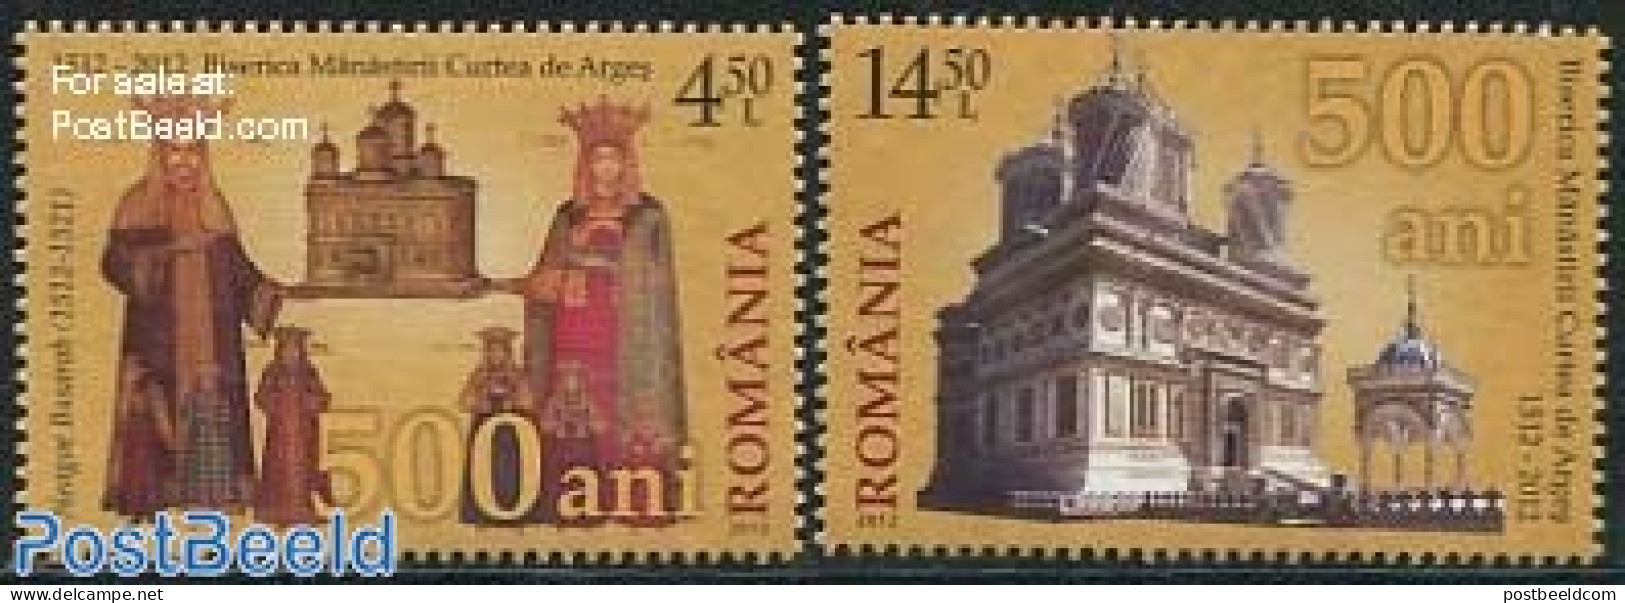 Romania 2012 500 Years Curtea De Arges 2v, Mint NH, Religion - Churches, Temples, Mosques, Synagogues - Cloisters & Ab.. - Neufs